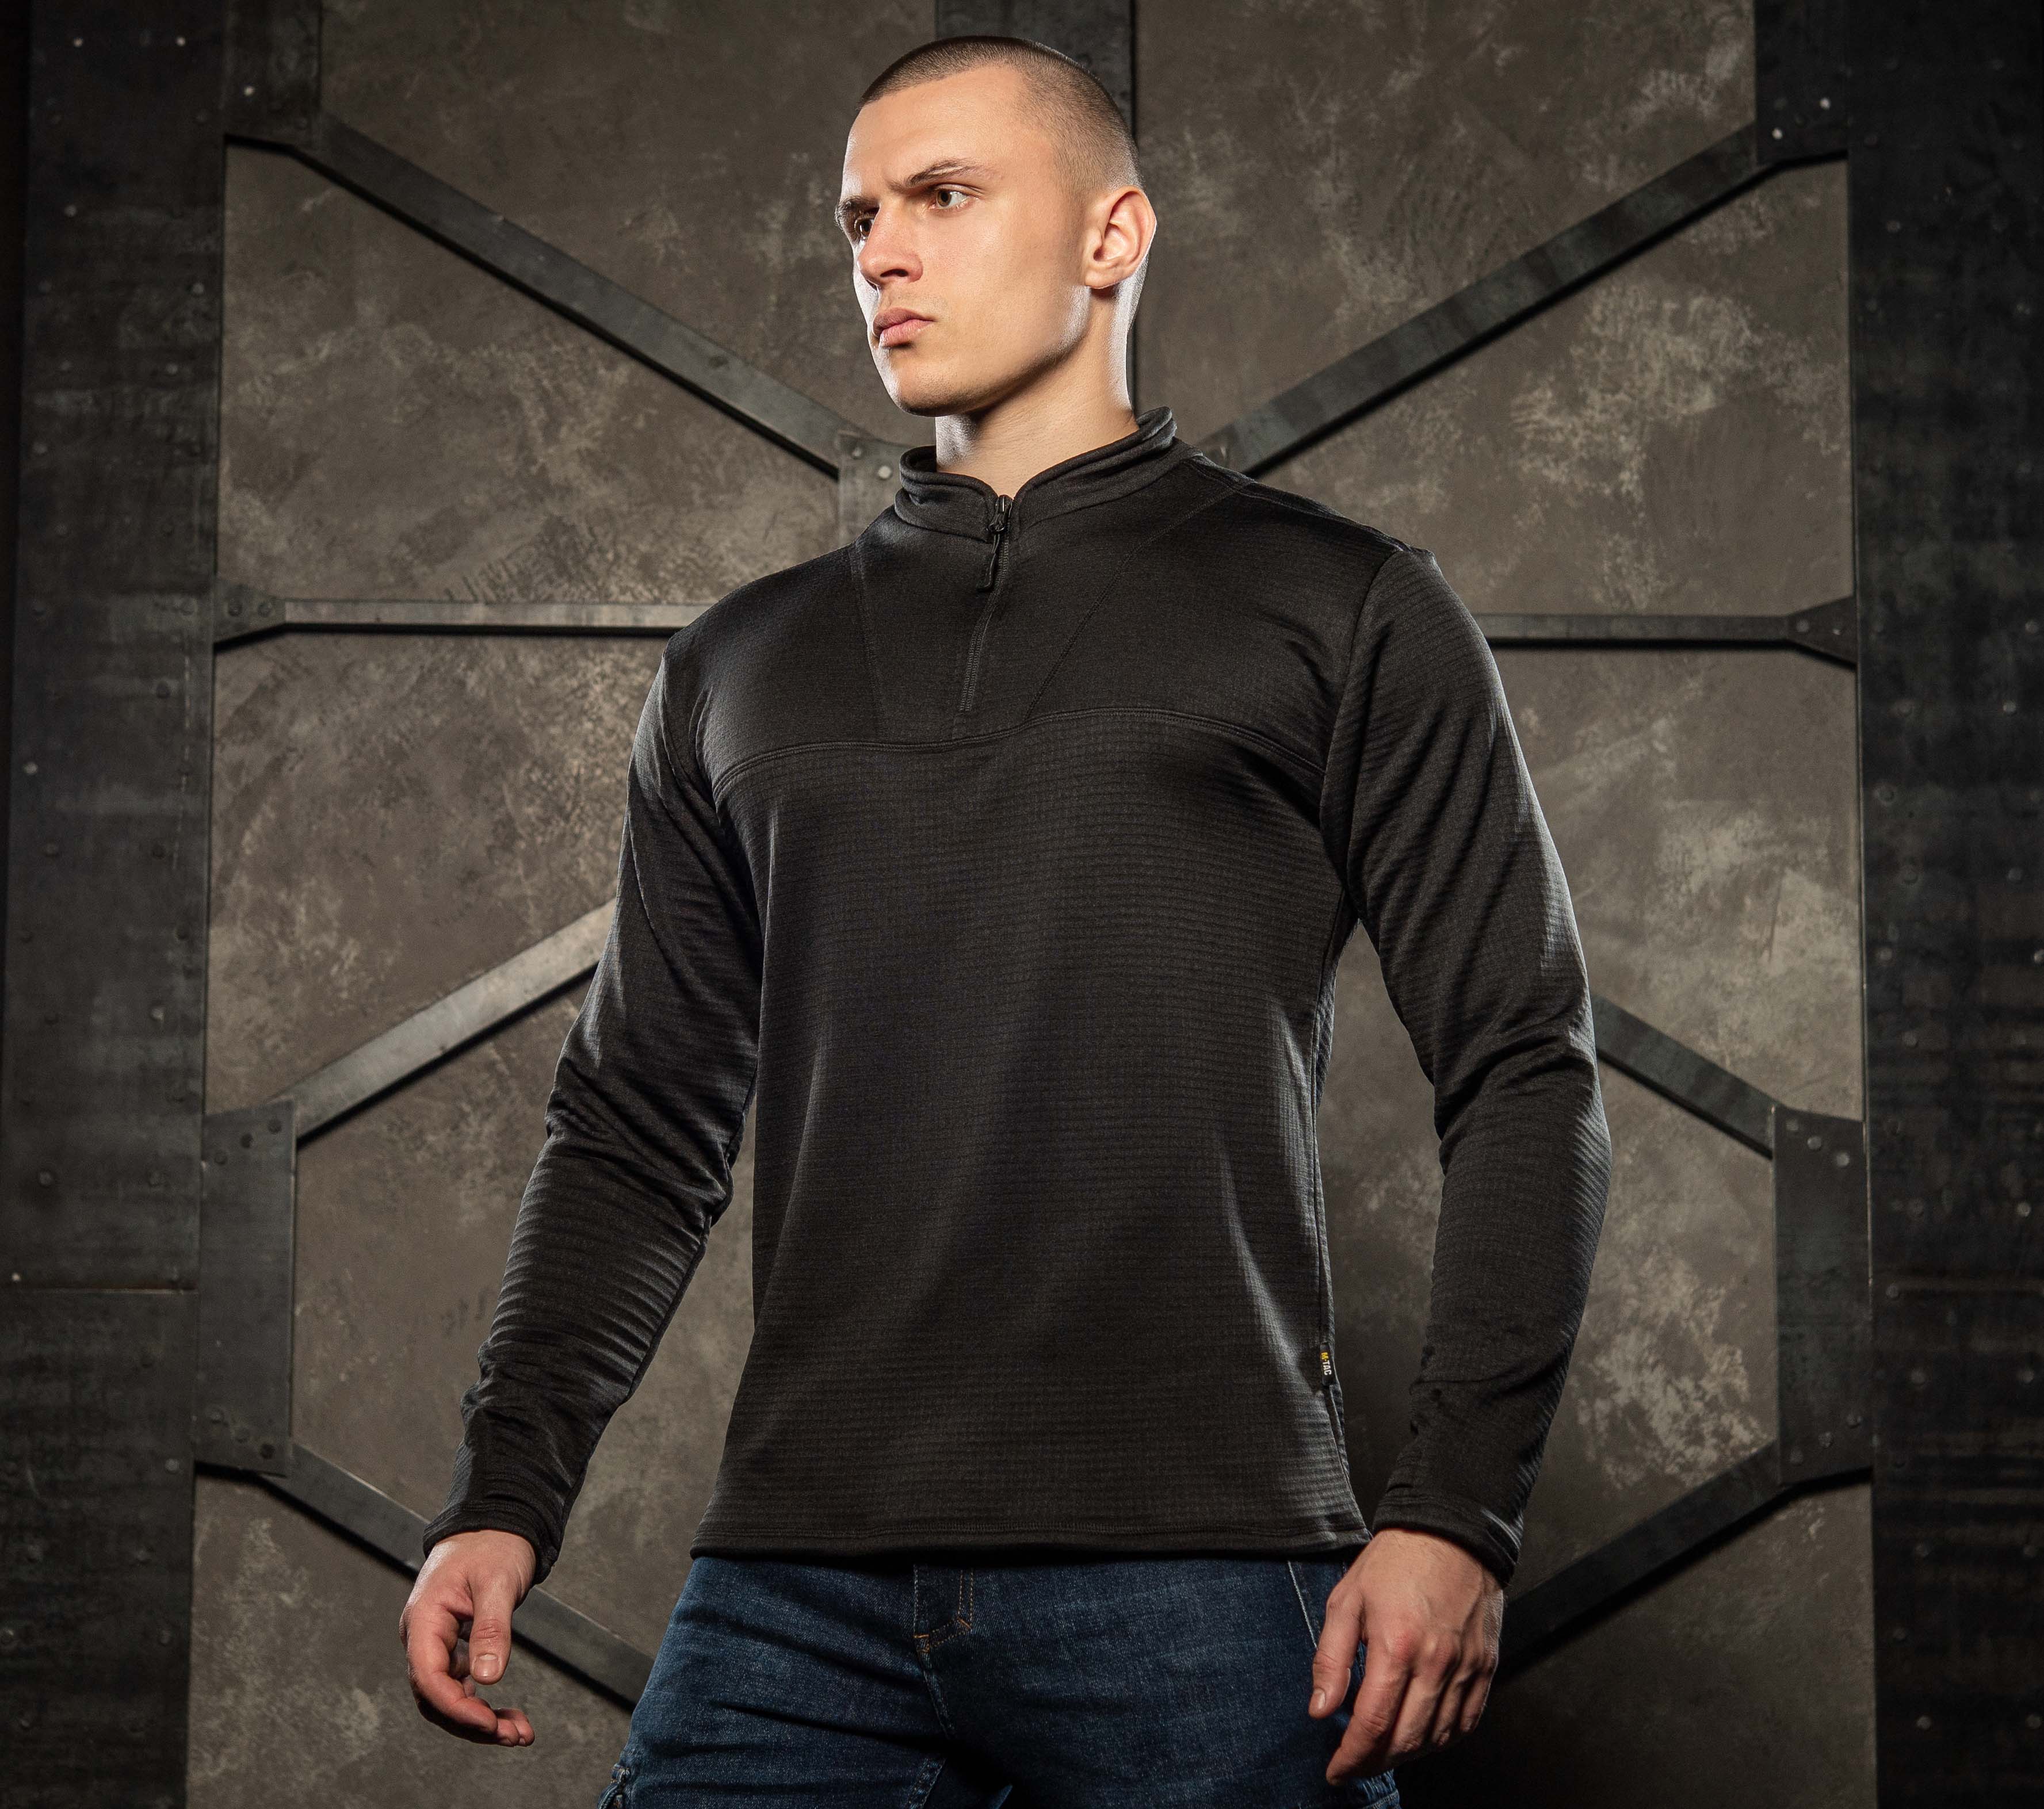 Men's Tactical Military Thermal Underwear Zh5-2